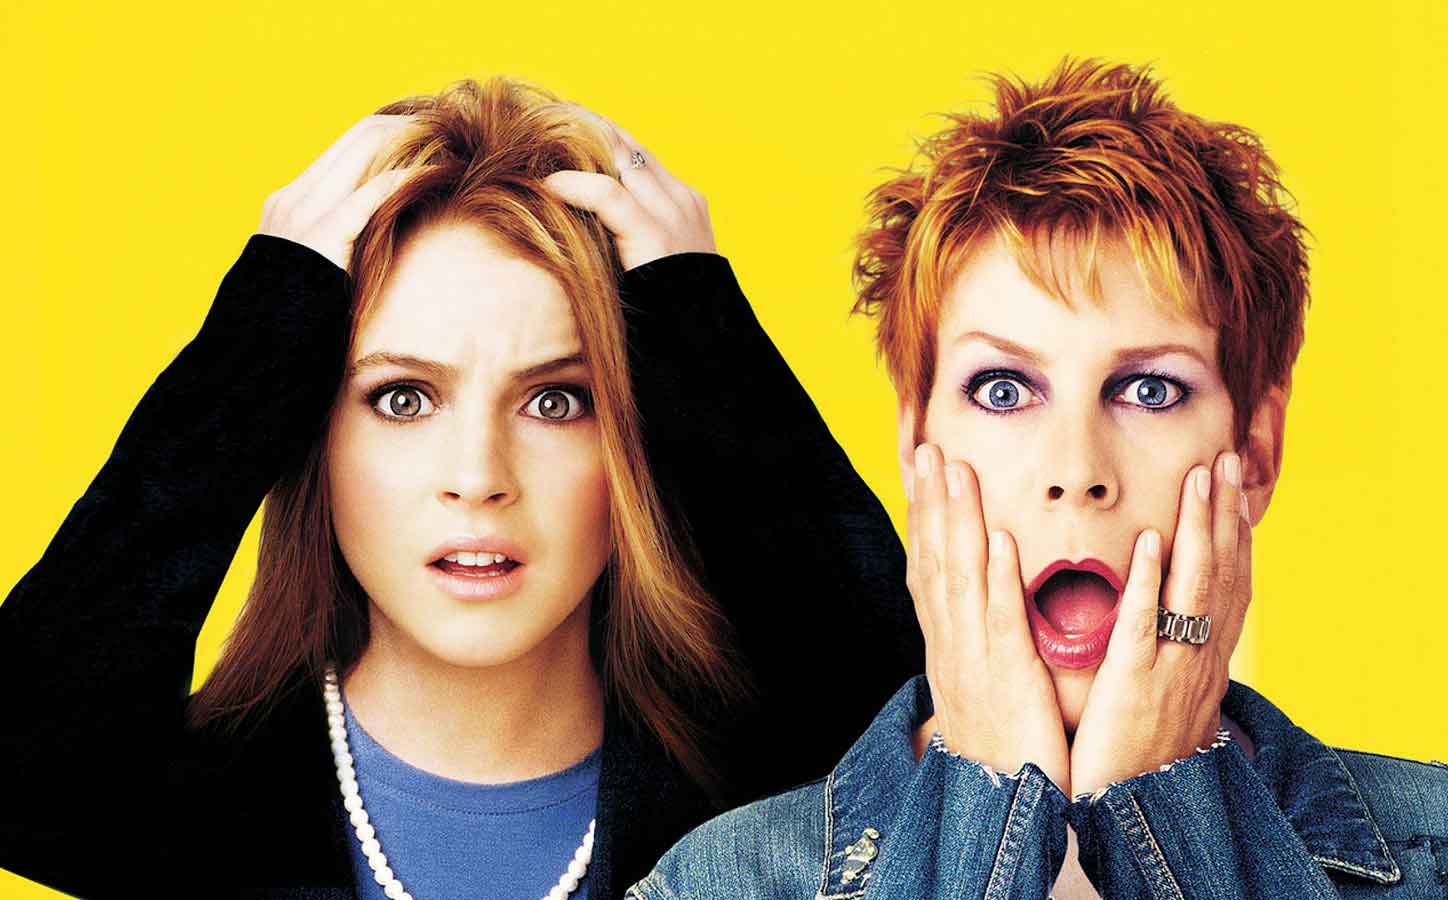 The Disney Channel is rebooting Freaky Friday - as a musical